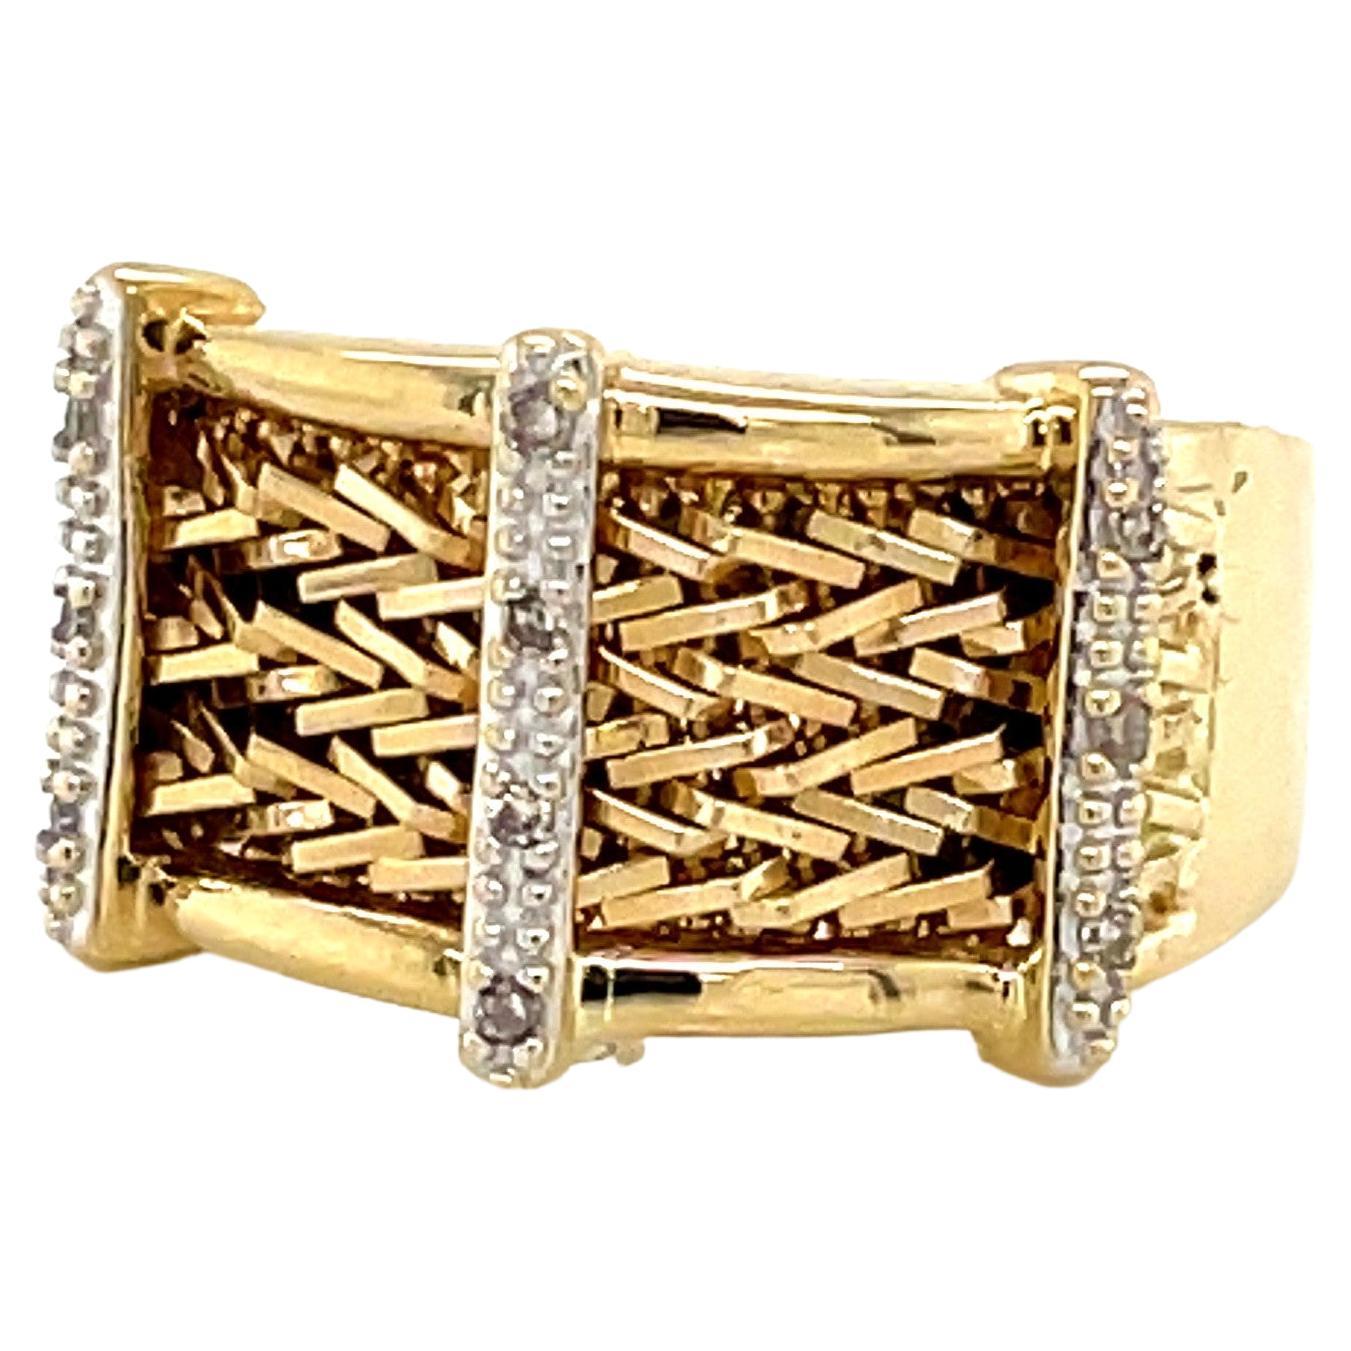 14 Karat Woven Yellow Gold Band Ring with Diamond Accents